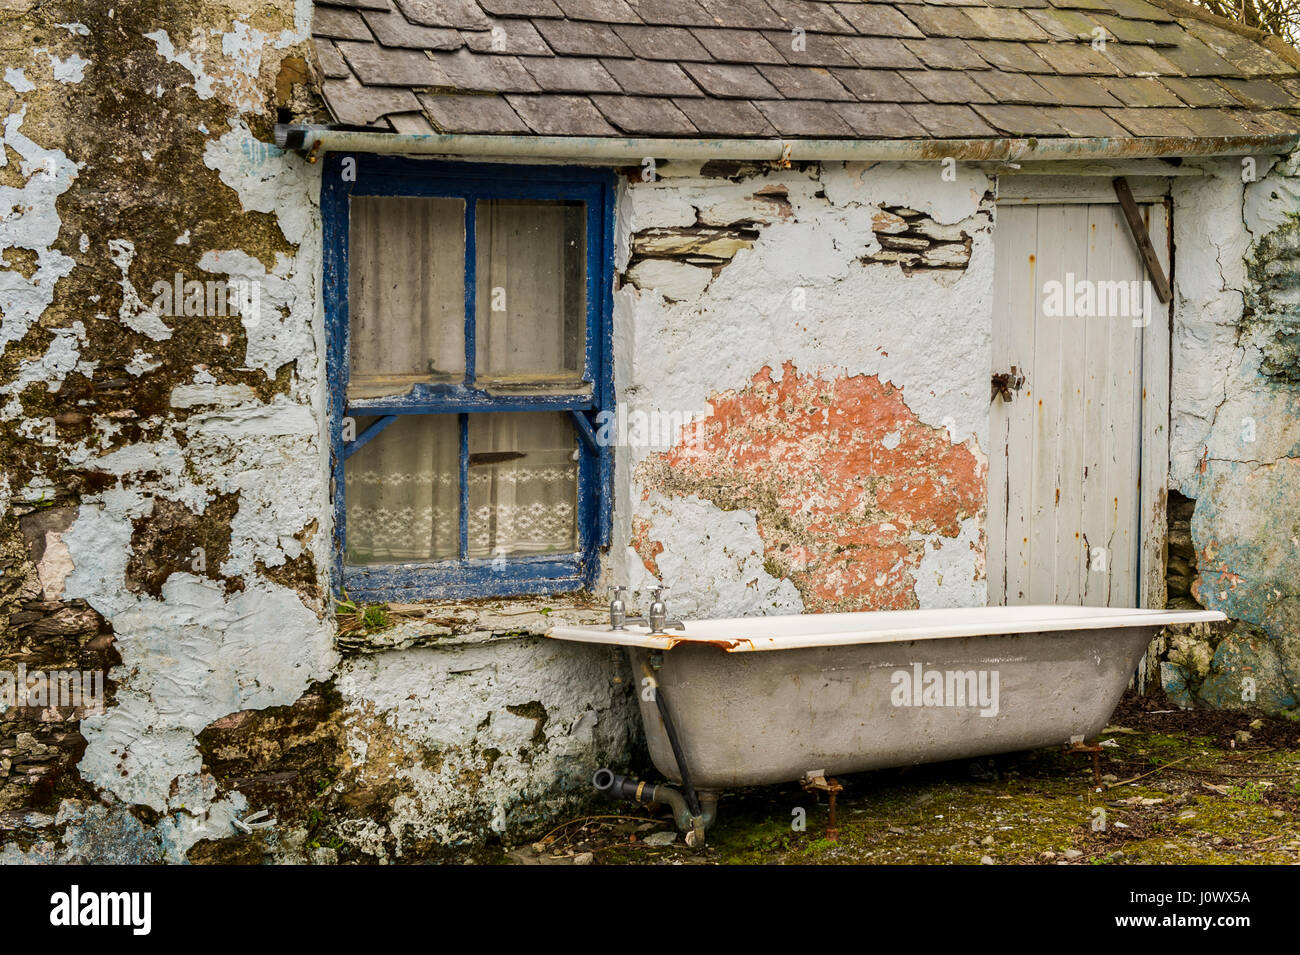 Bath disused and abandoned outside an old shed with a window and door in Schull, Ireland. Stock Photo